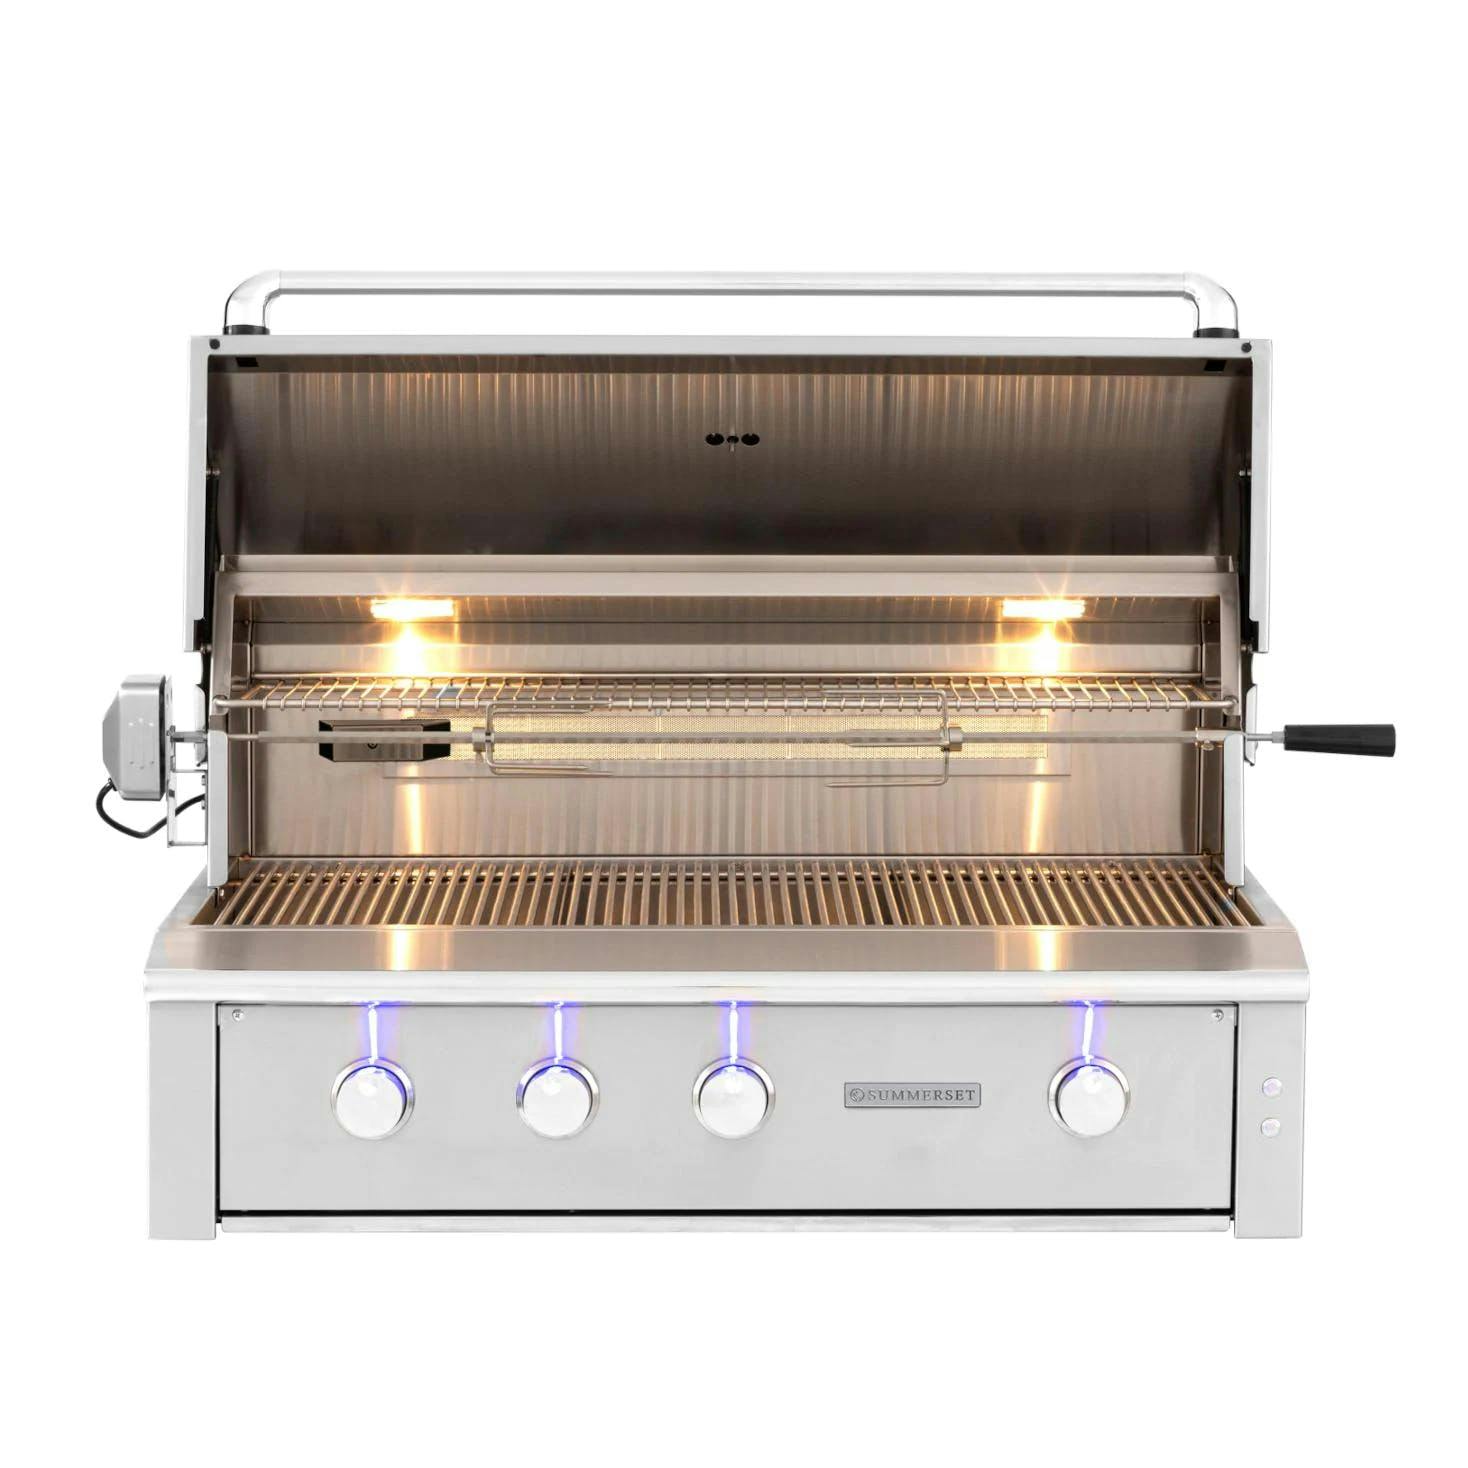 Summerset Alturi Built-in Gas Grill with Stainless Steel Burners & Rotisserie